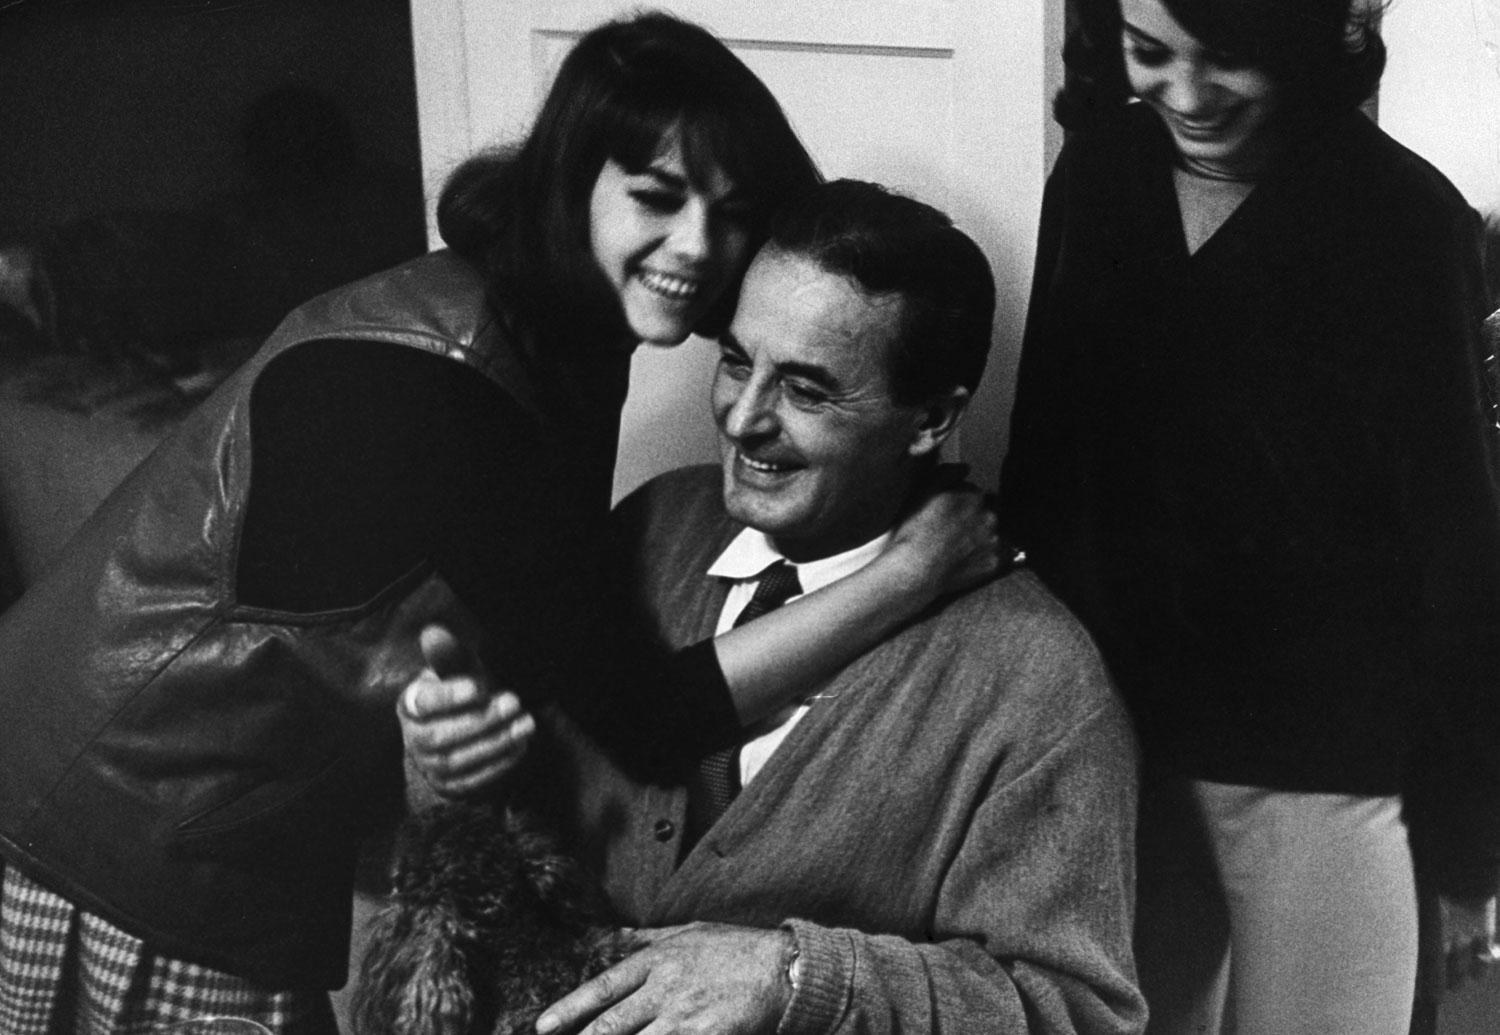 Natalie Wood with her father, Nick, a film prop maker, and her sister Lana, in 1963.